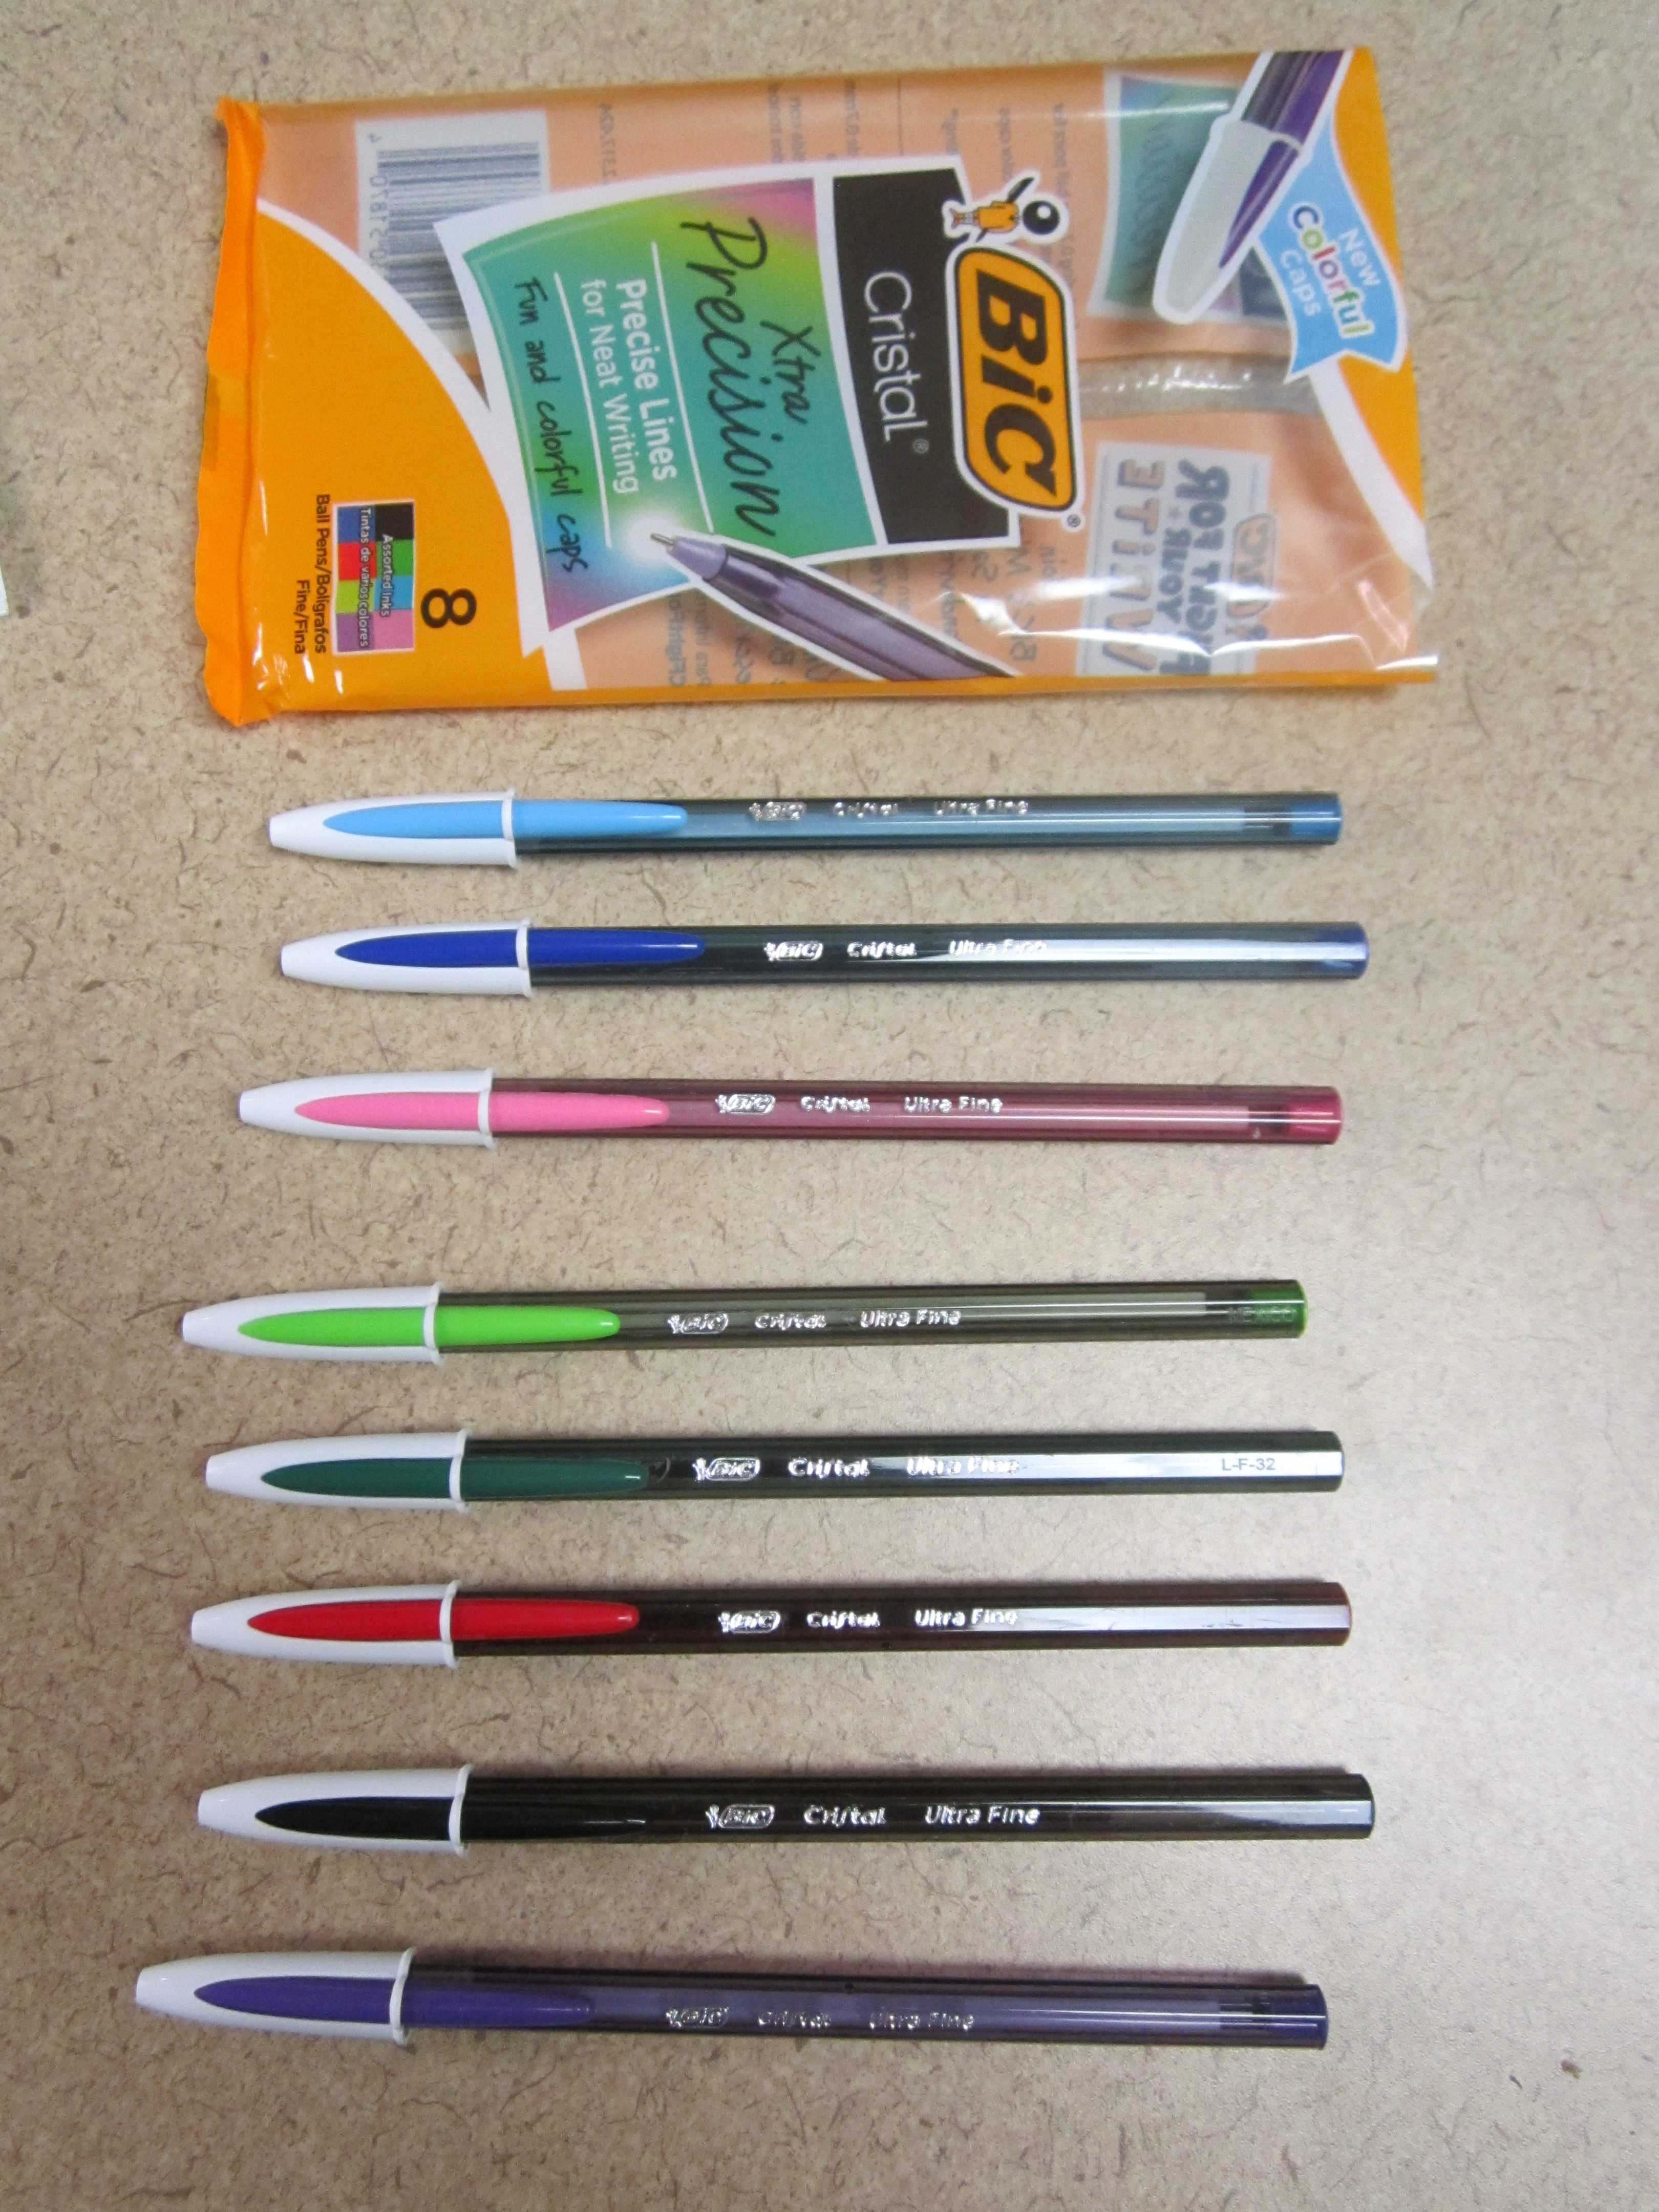 BIC CRISTAL FUN BALL PEN ASSORTED INK COLOR FINE WRITING PACK OF 4 PENS